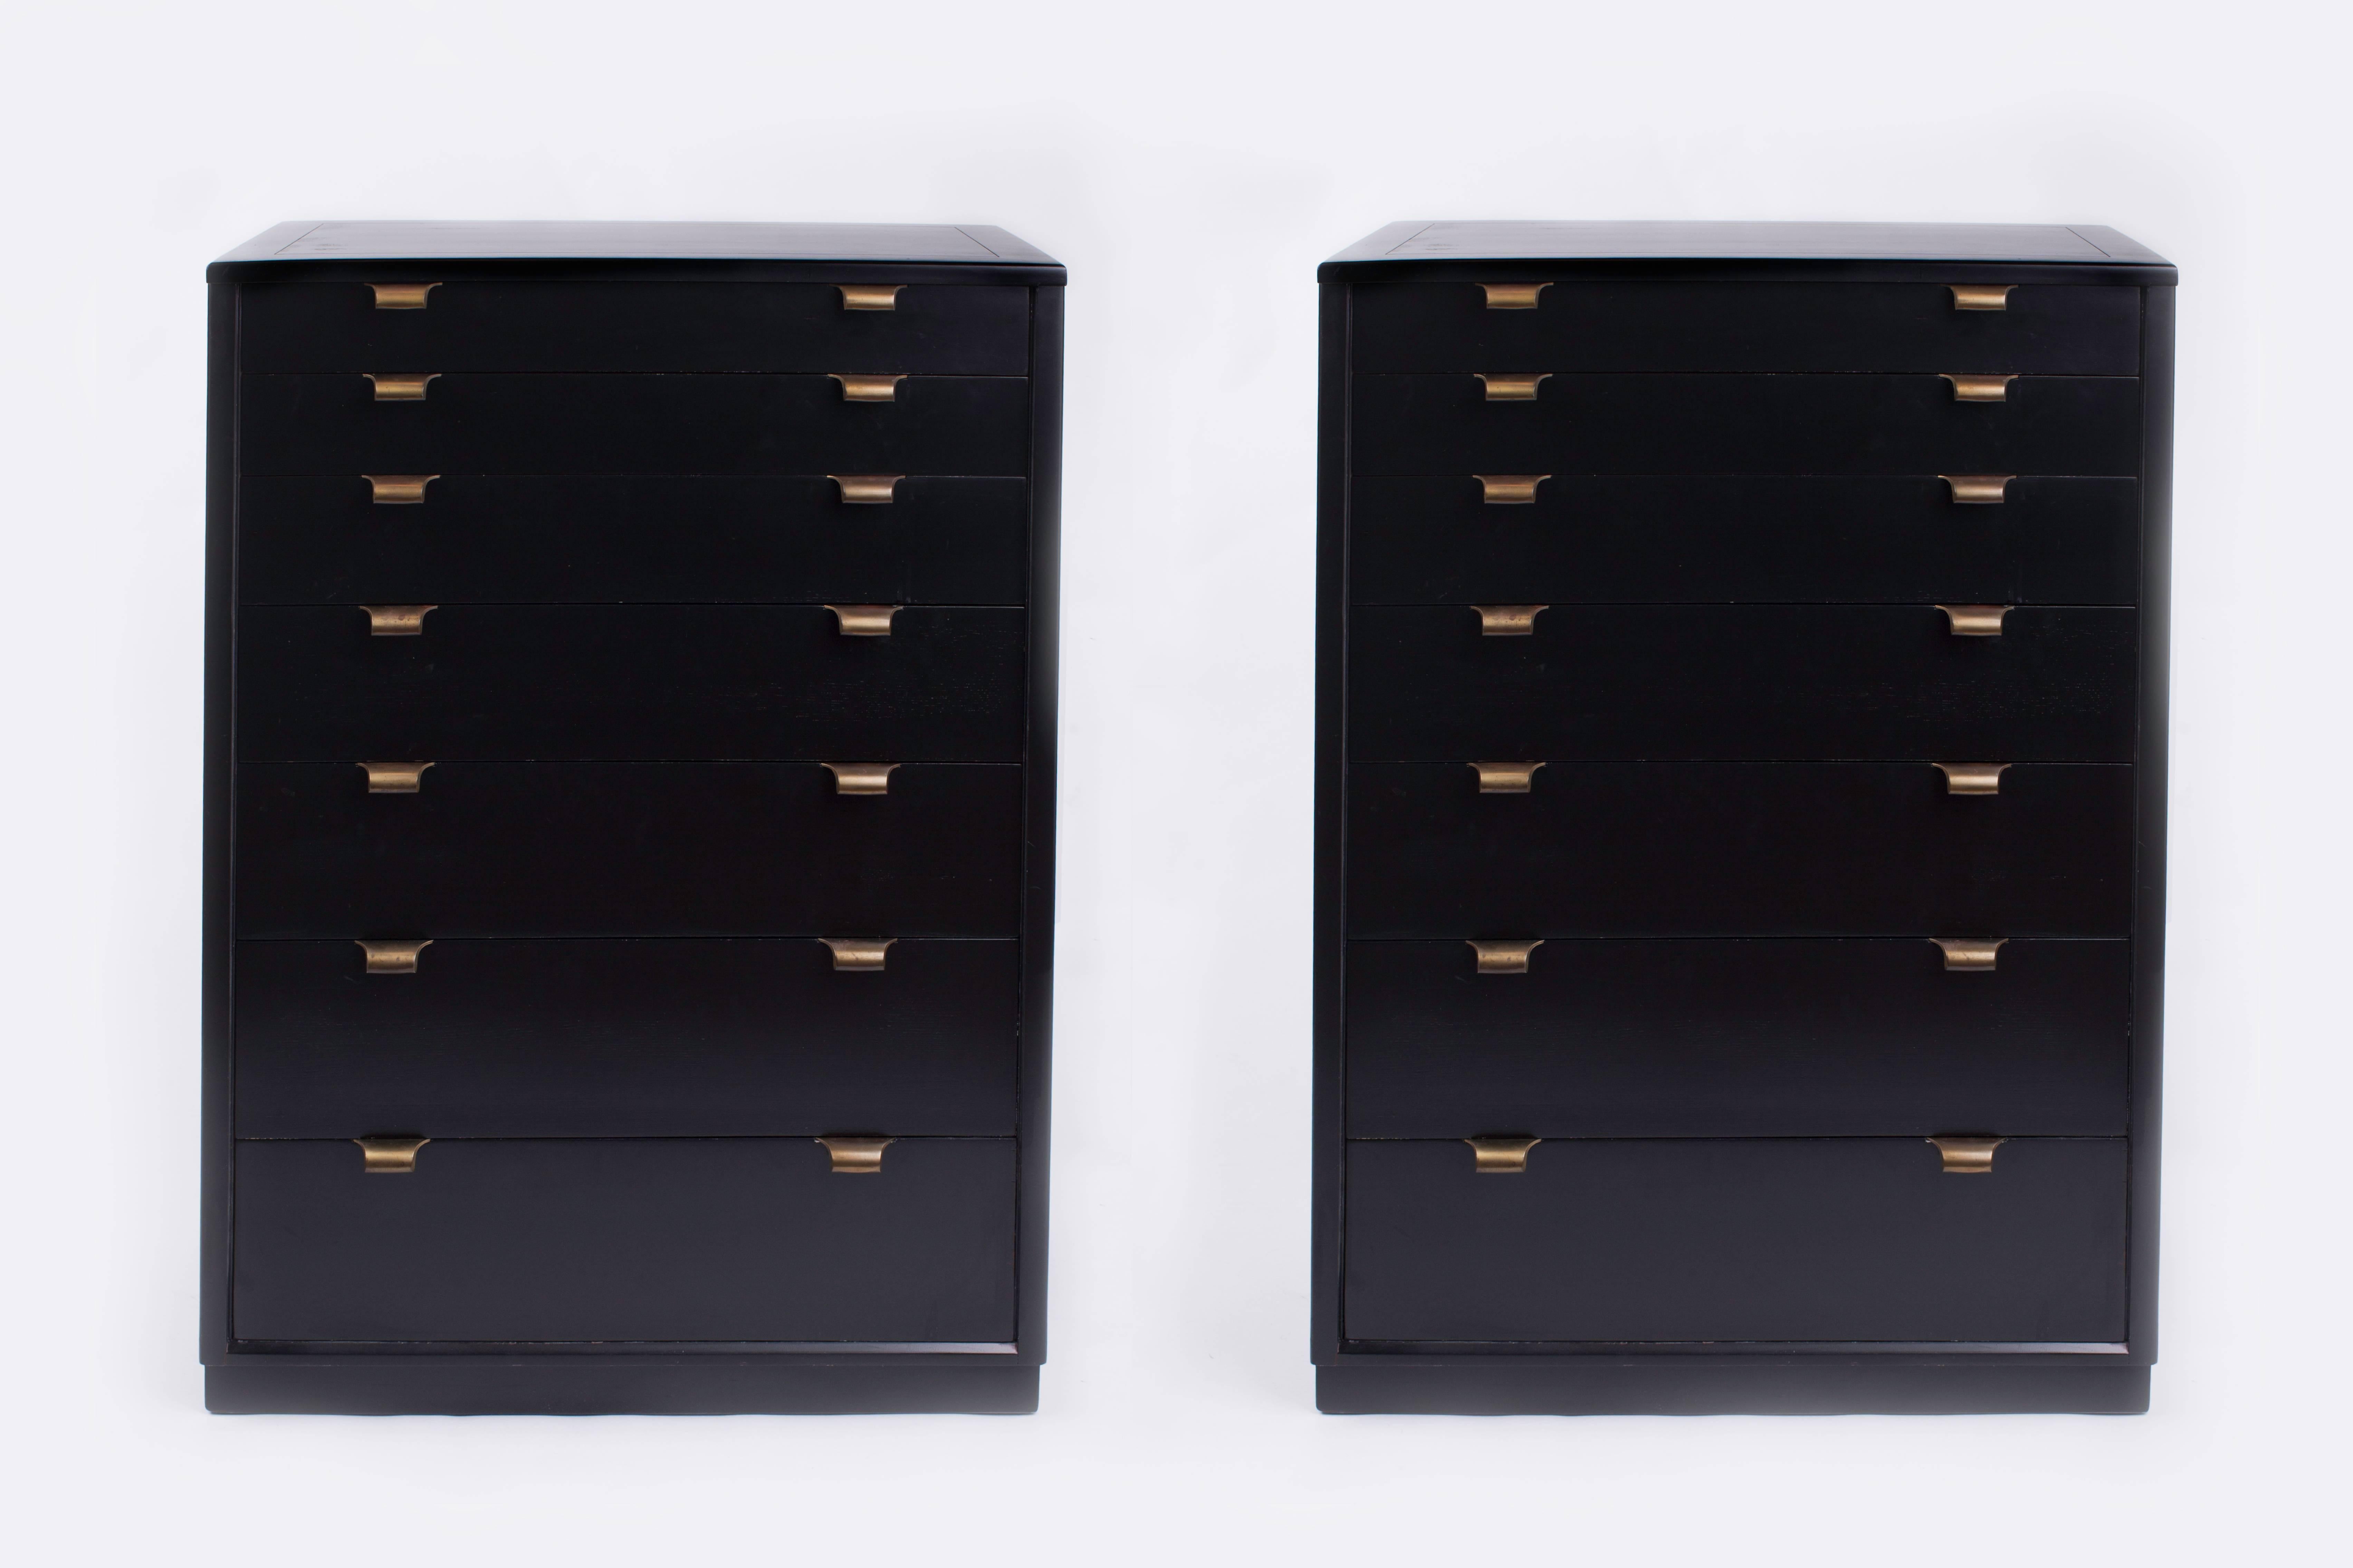 Edward Wormley (1907–1995)

Pair of rectangular seven-drawer dressers with recessed base by Edward Wormley for Drexel, in black-lacquered wood with brass pulls.

Stamped “Drexel” in top drawers and on back.

United States, 1940's. 

43